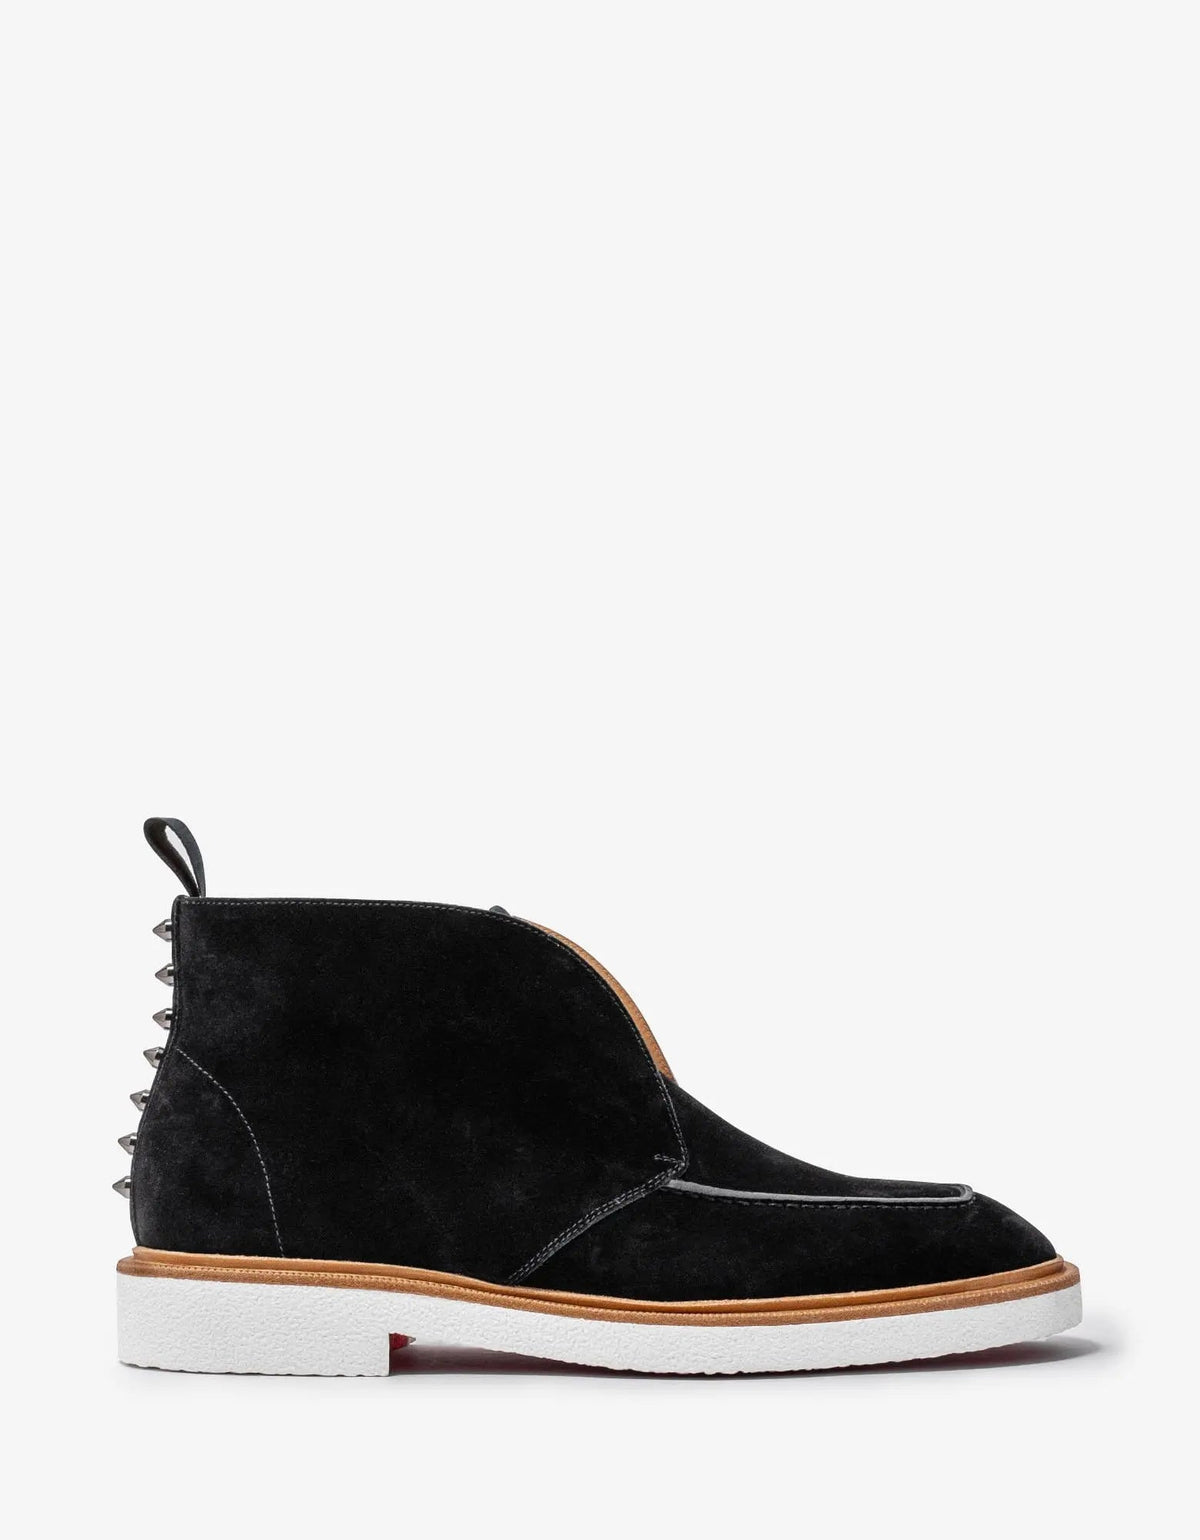 Christian Louboutin - Citycrepe Black Suede Ankle Boots -